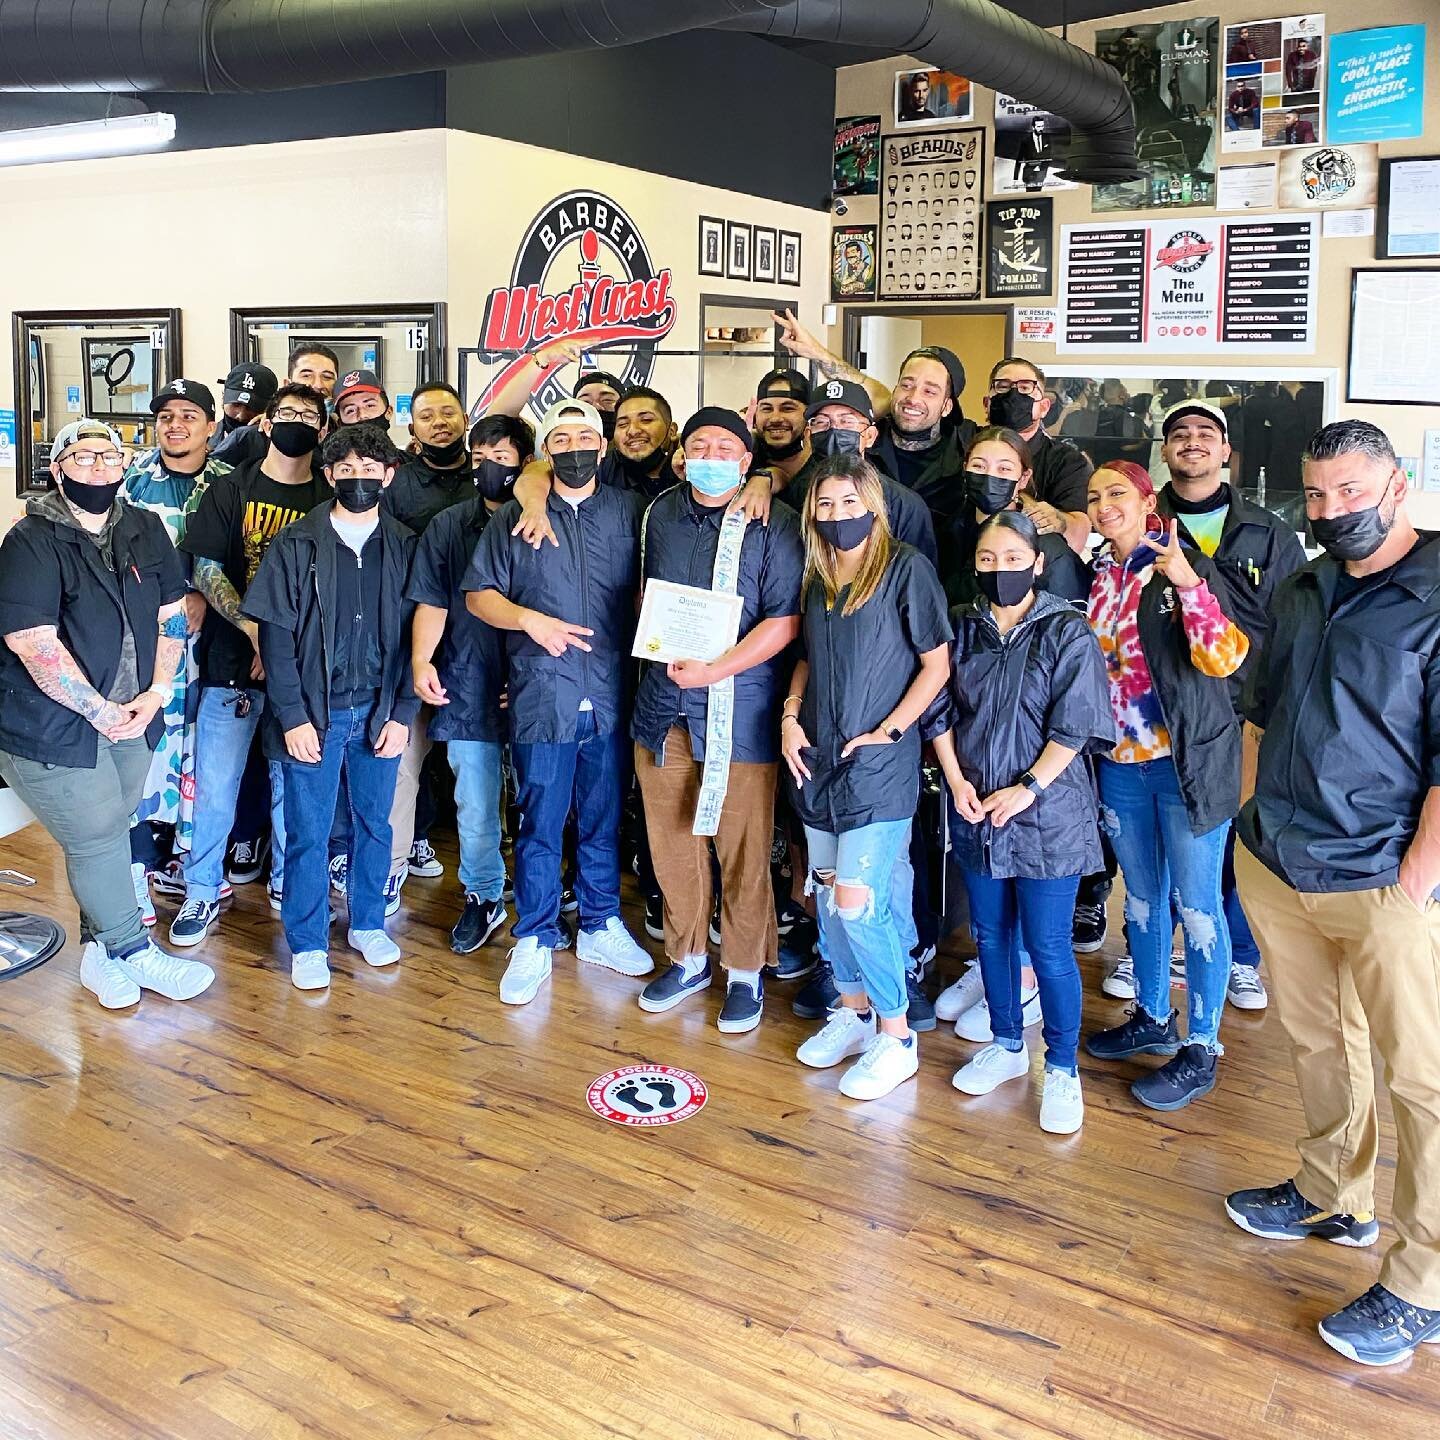 Another graduate in the books!! Congratulations to @limitless.blendz on his completions of 1500 hours. Wish you the best of success with your new career! #westcoastbarbercollege #barbercollege #barberschool #oceanside #barbershop #barber #barberlife 